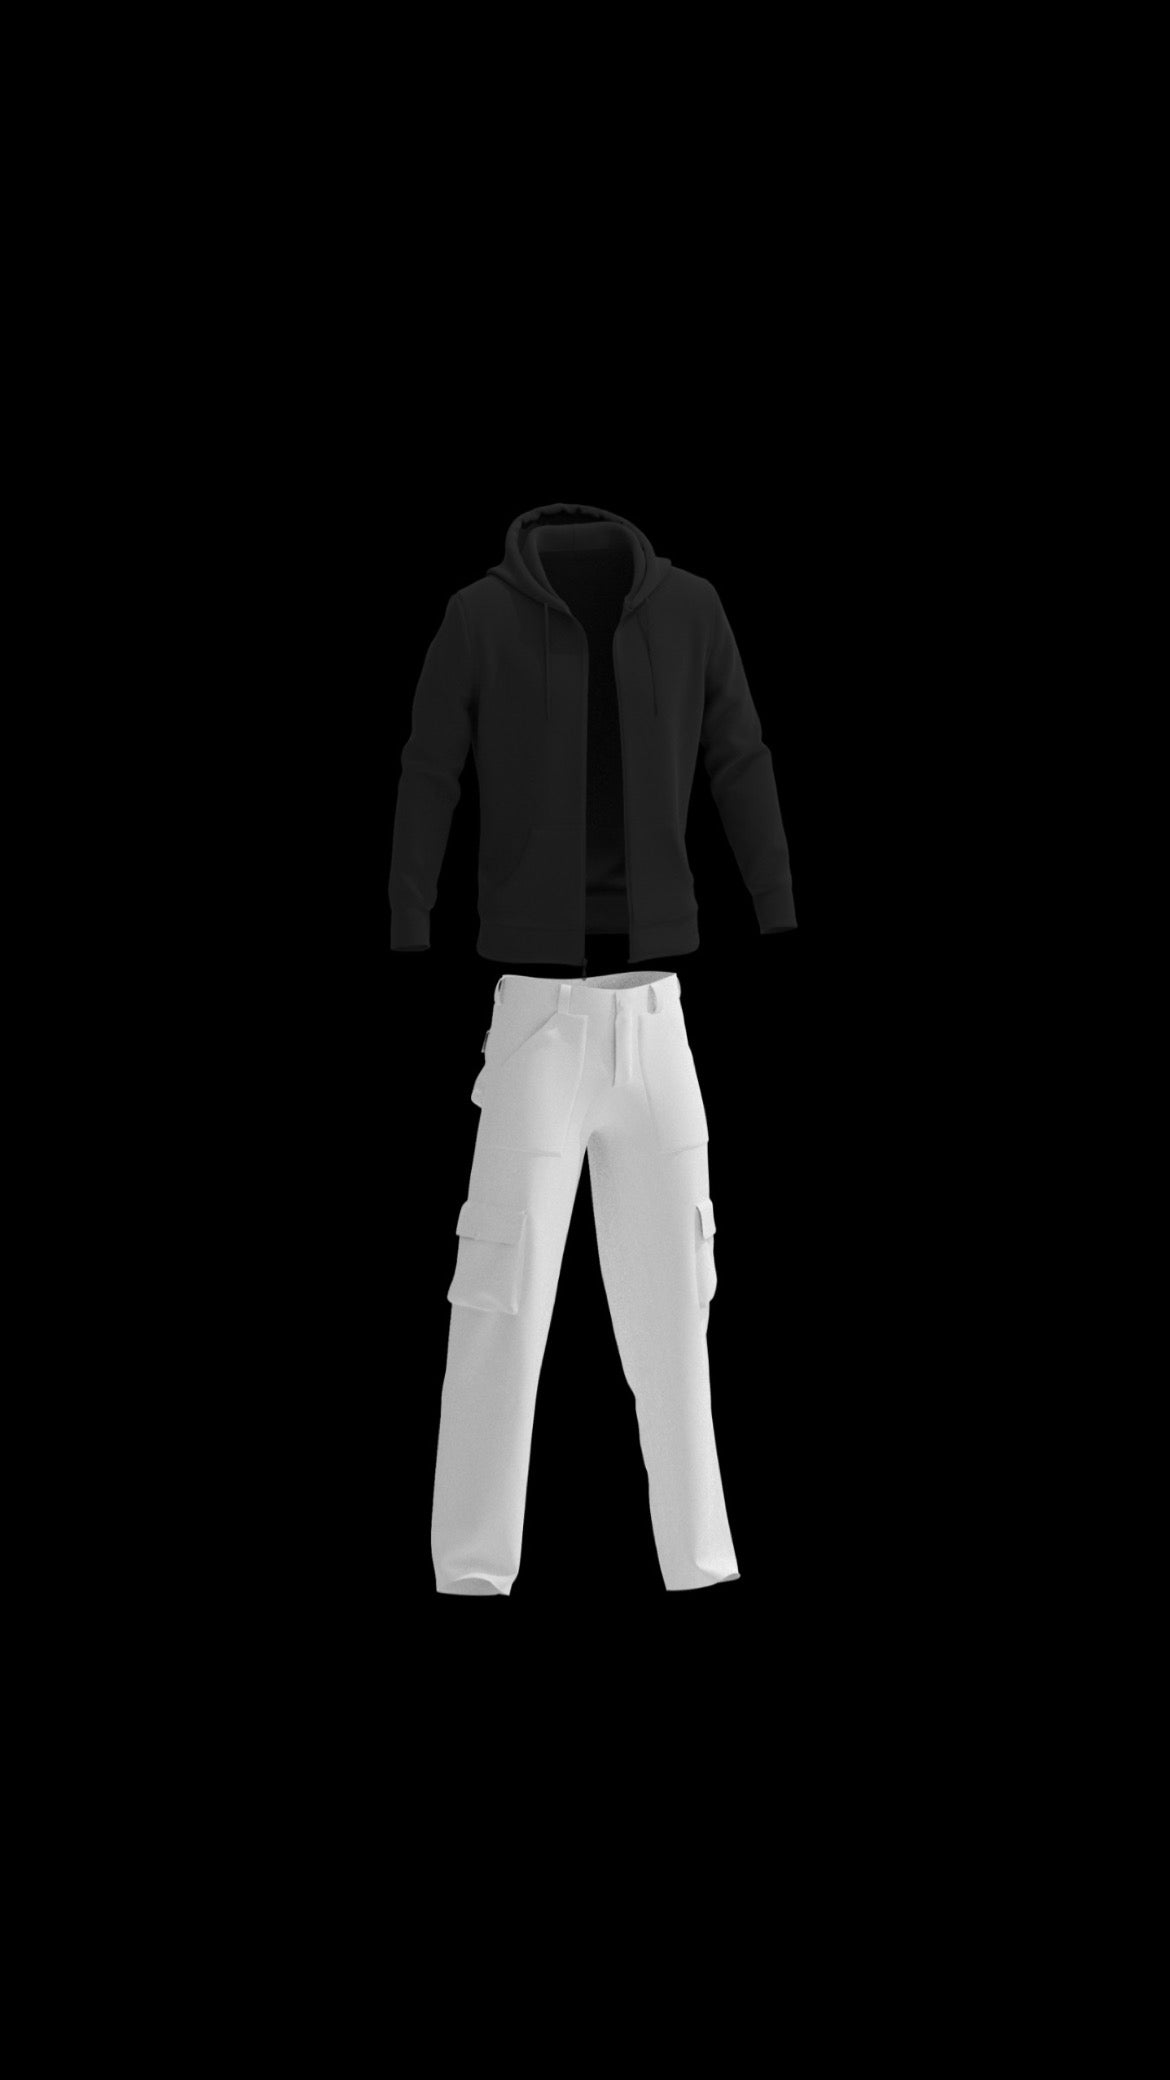 Cargo pants with Zip up jacket Fully Customisable bundle any color Read description❗️